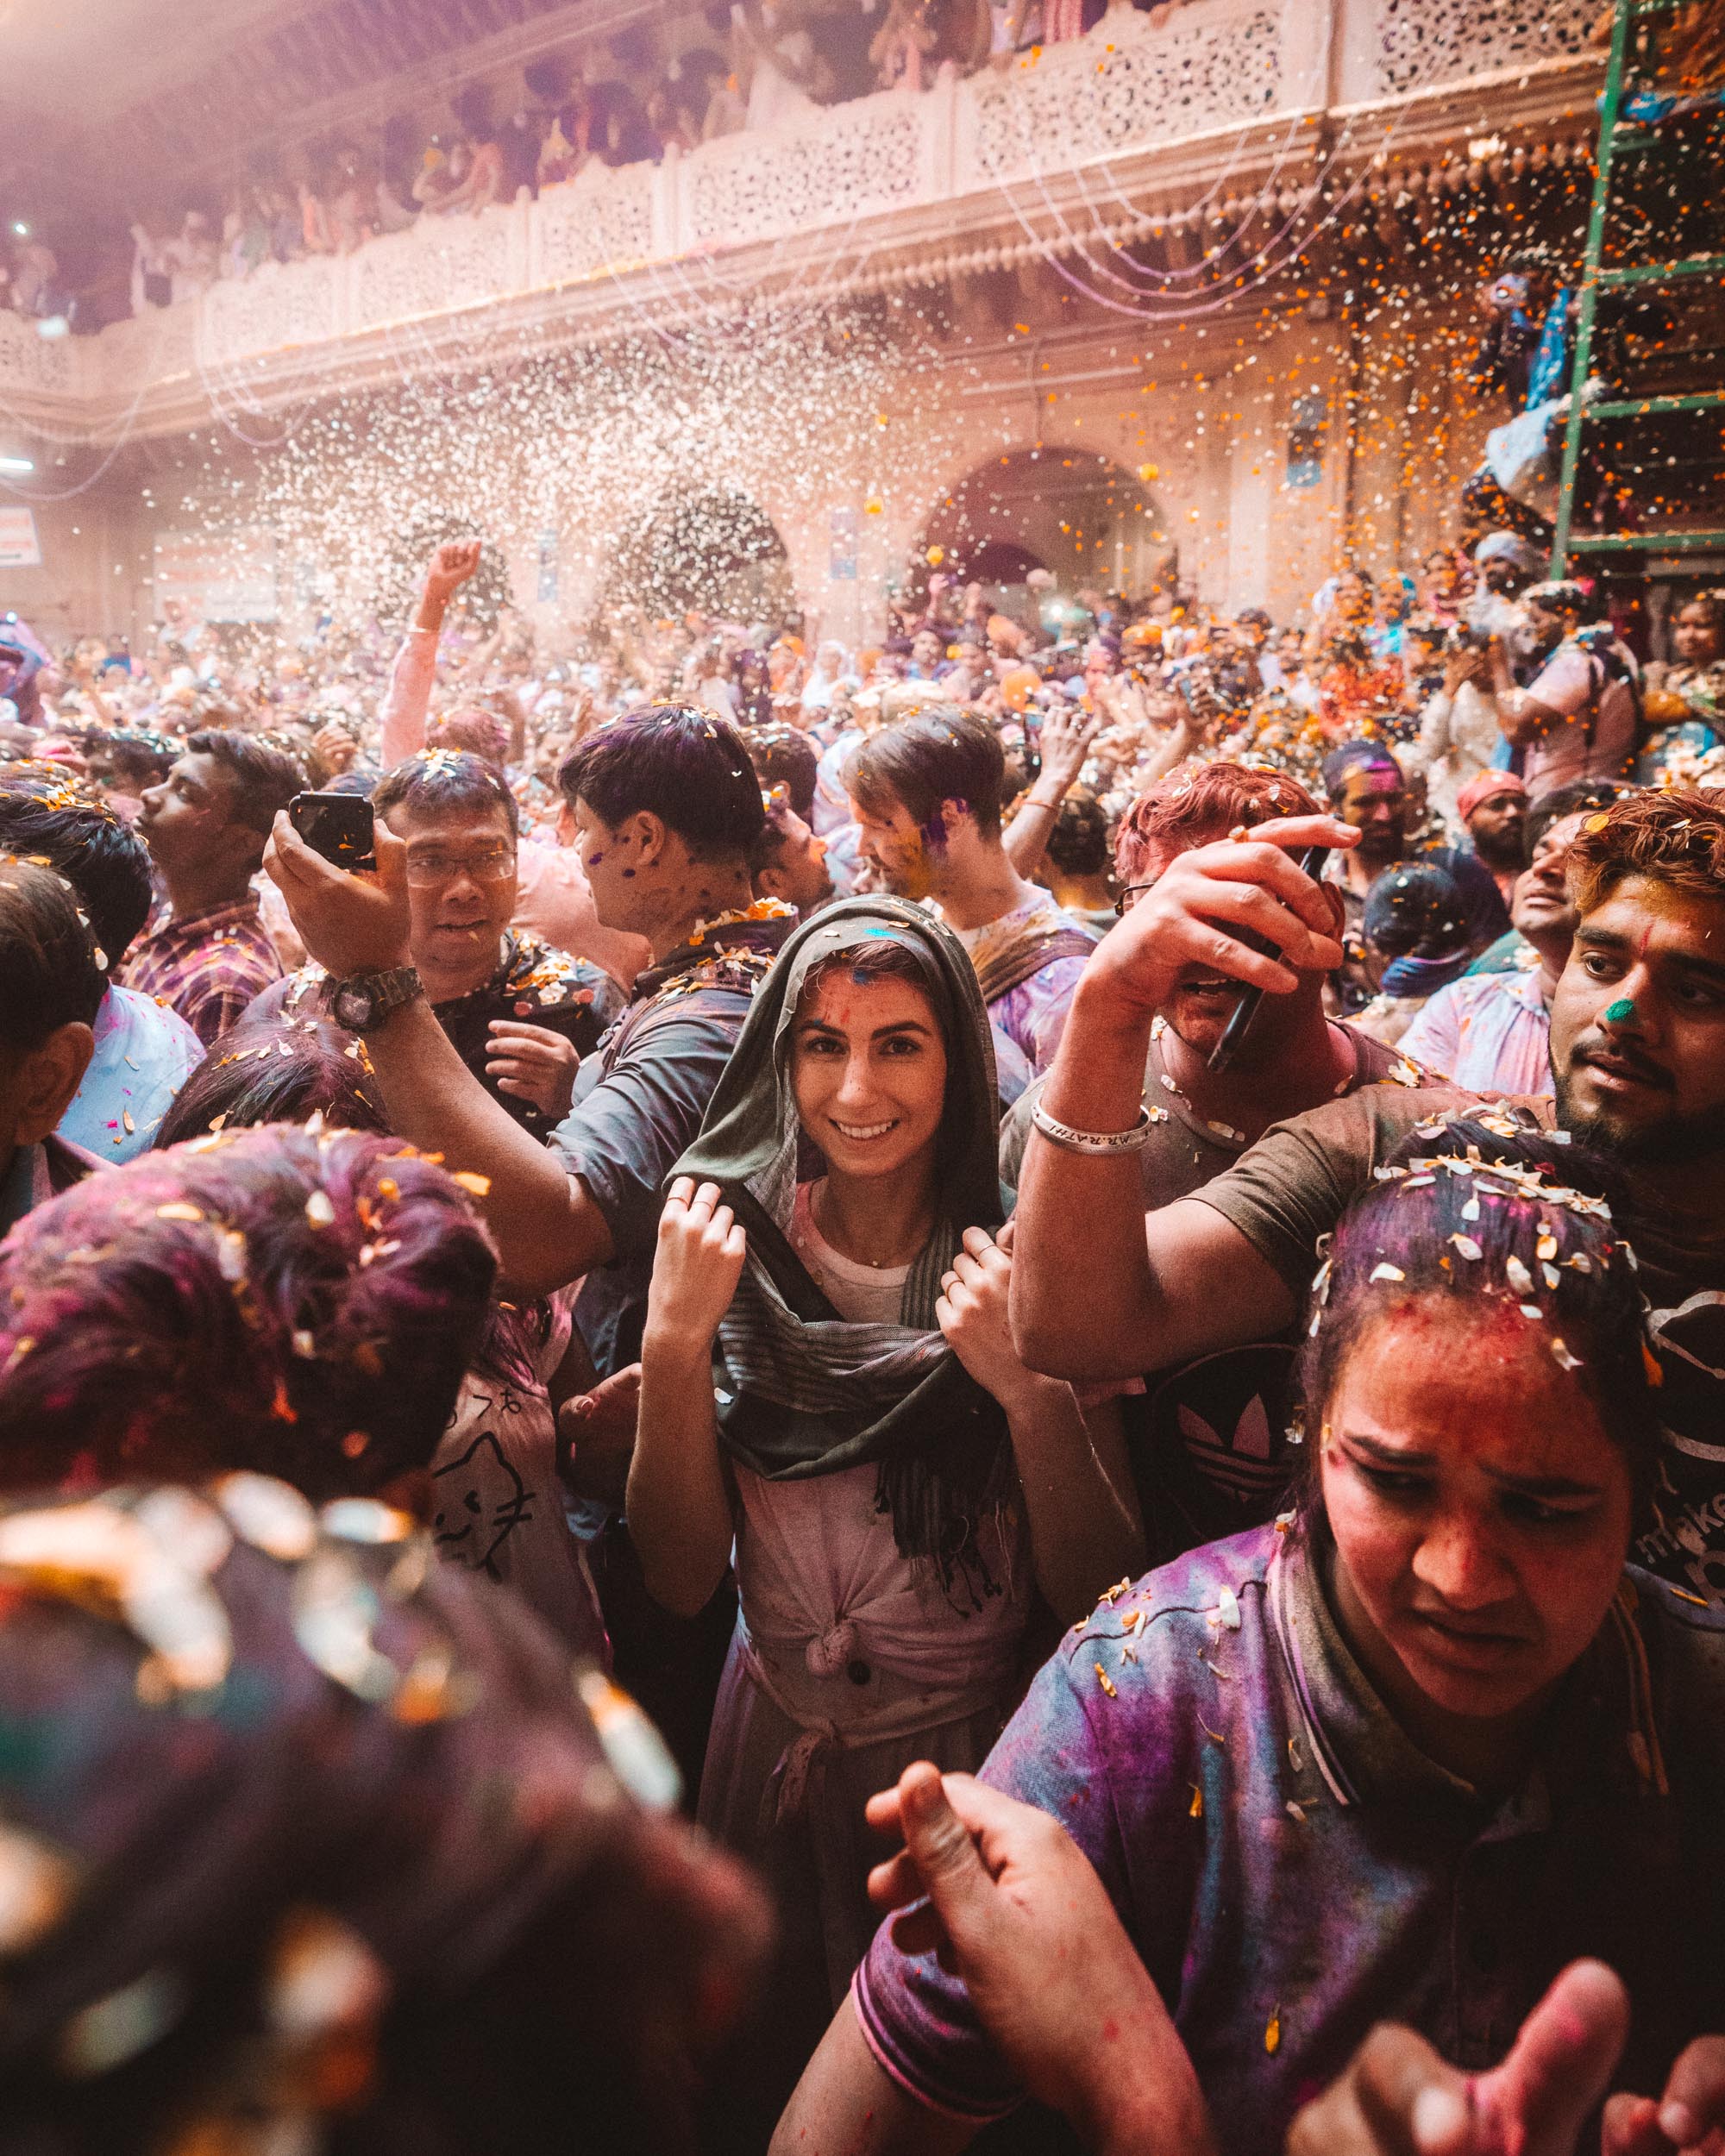 People celebrating with colorful powder and confetti during Pholoon Wali Holi Festival in Vrindavan, India via @finduslost